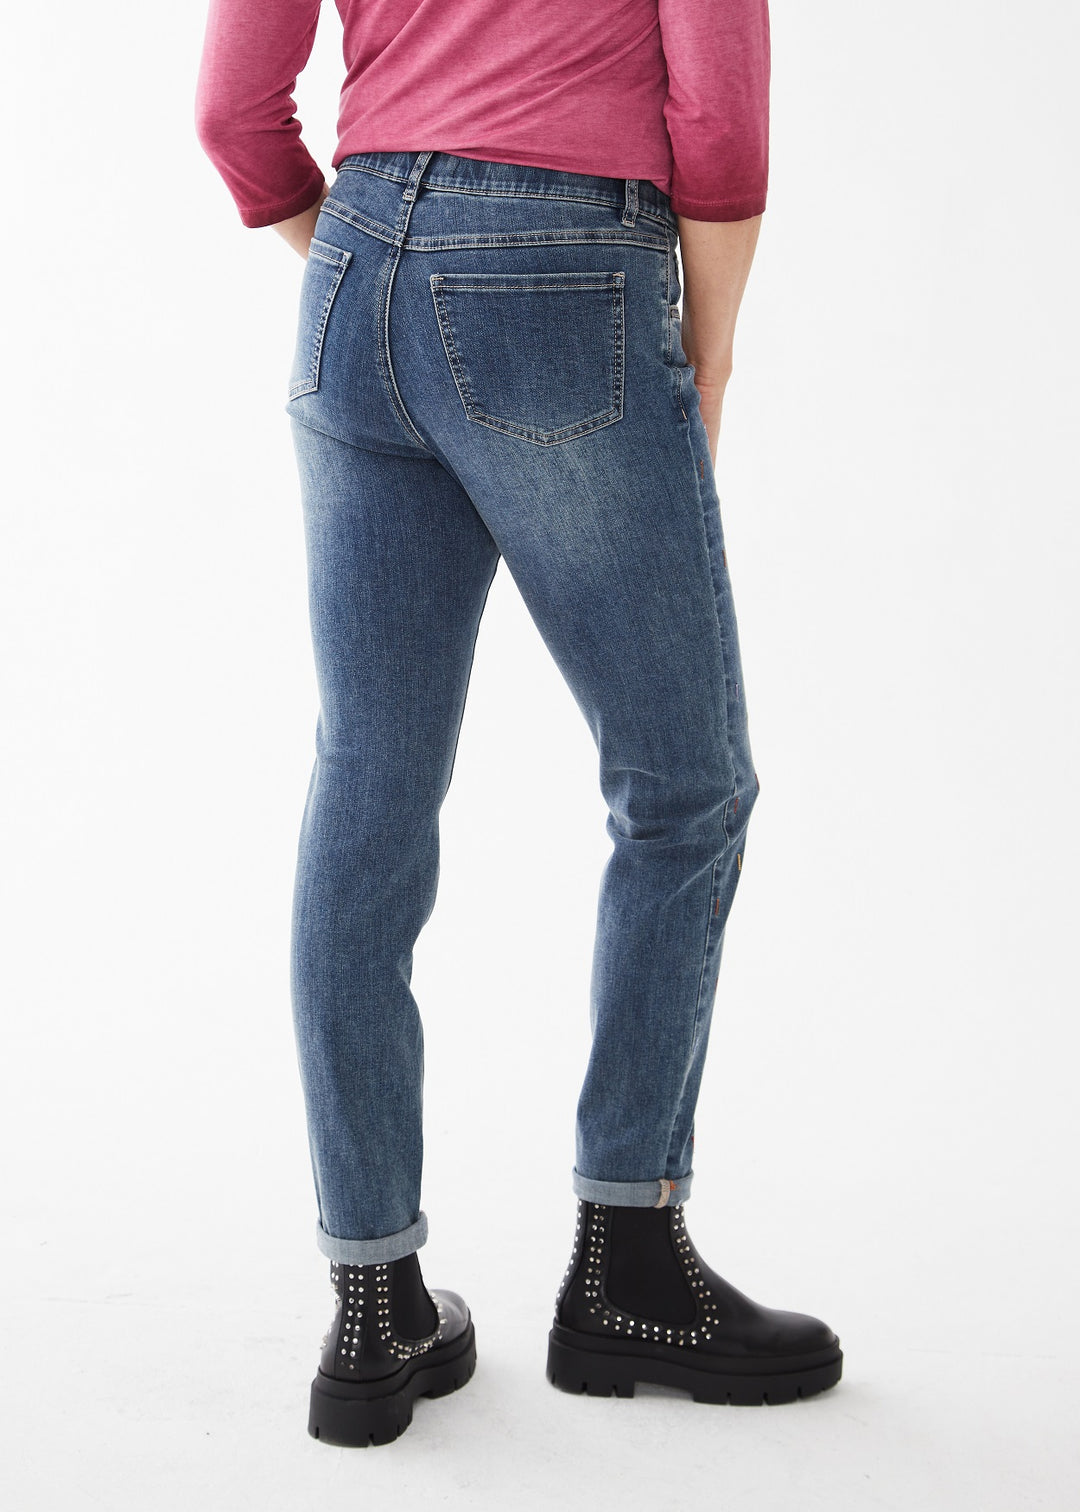 Multicolour Embroidered Pull On Jean